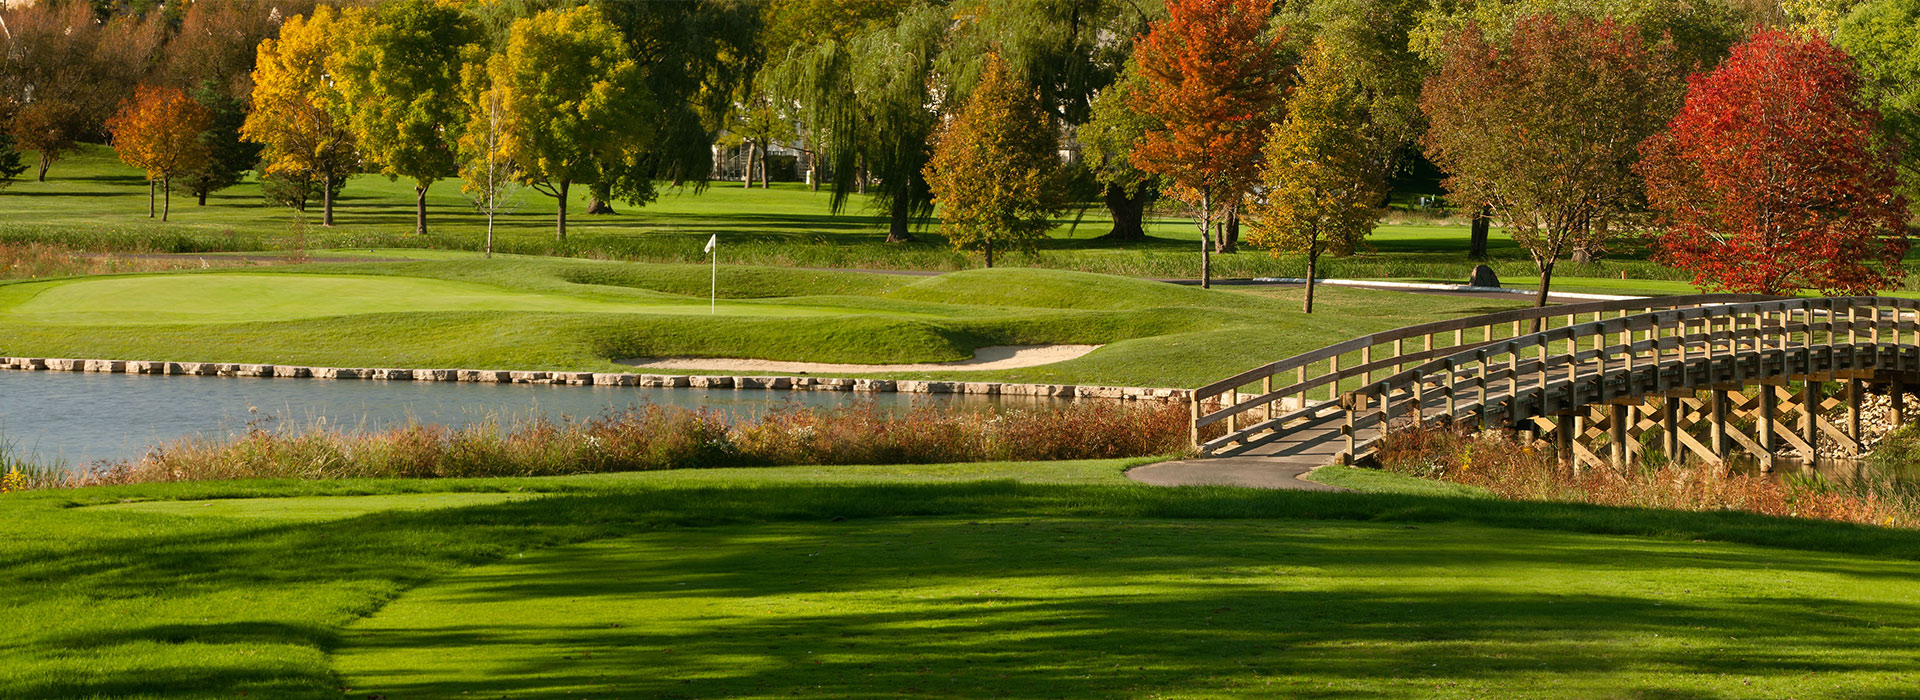 image of golf course with autumnal trees